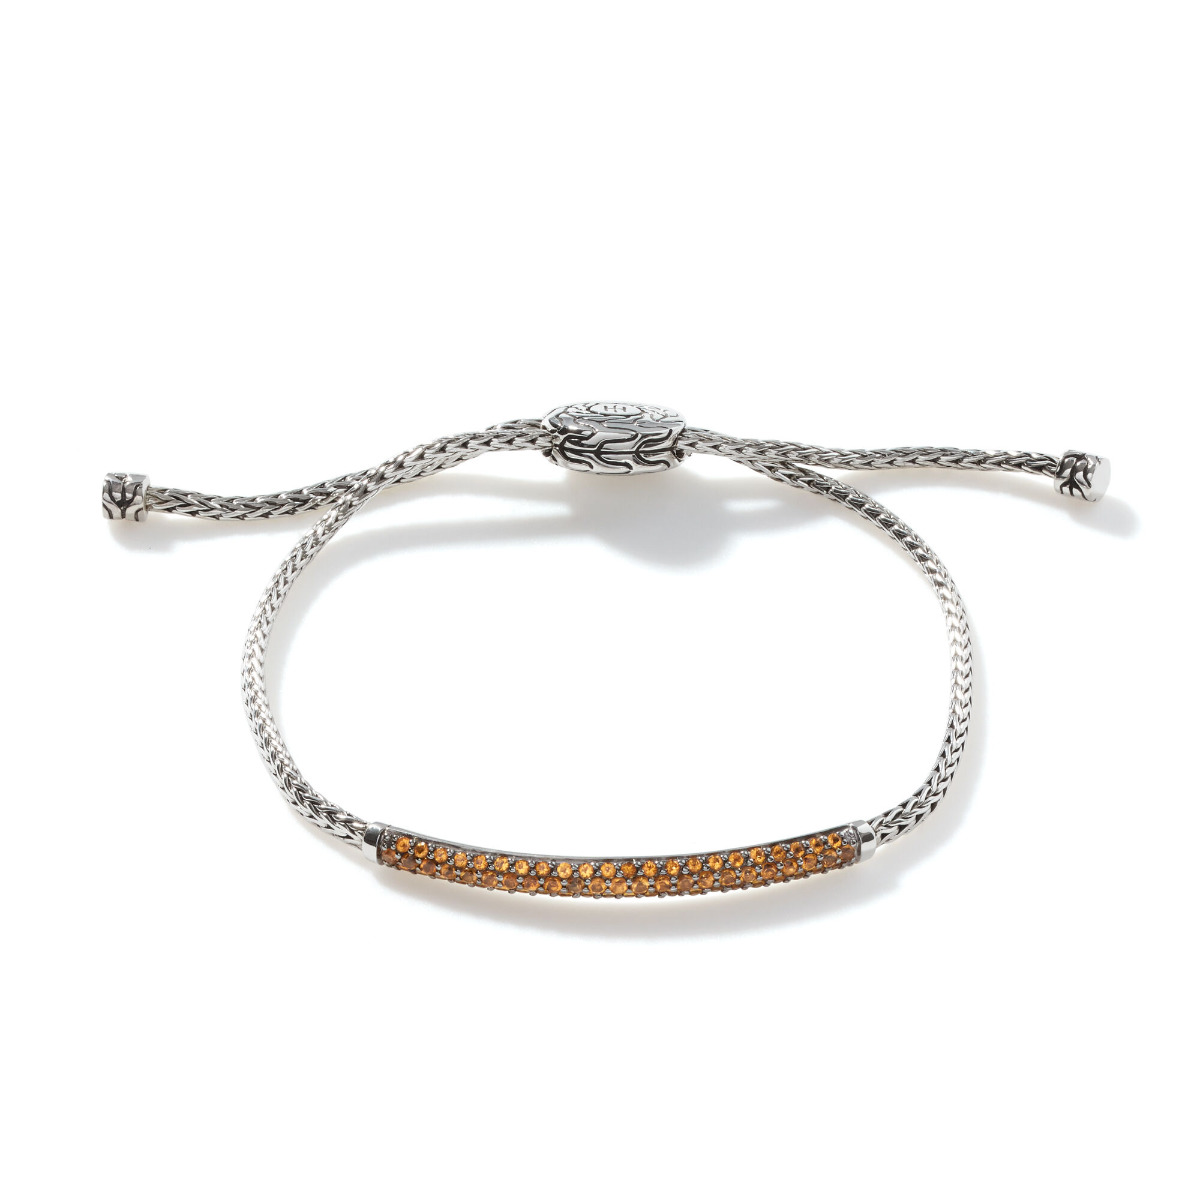 John Hardy "Classic Chain" sterling silver adjustable pull-through station bracelet featuring a citrine bar